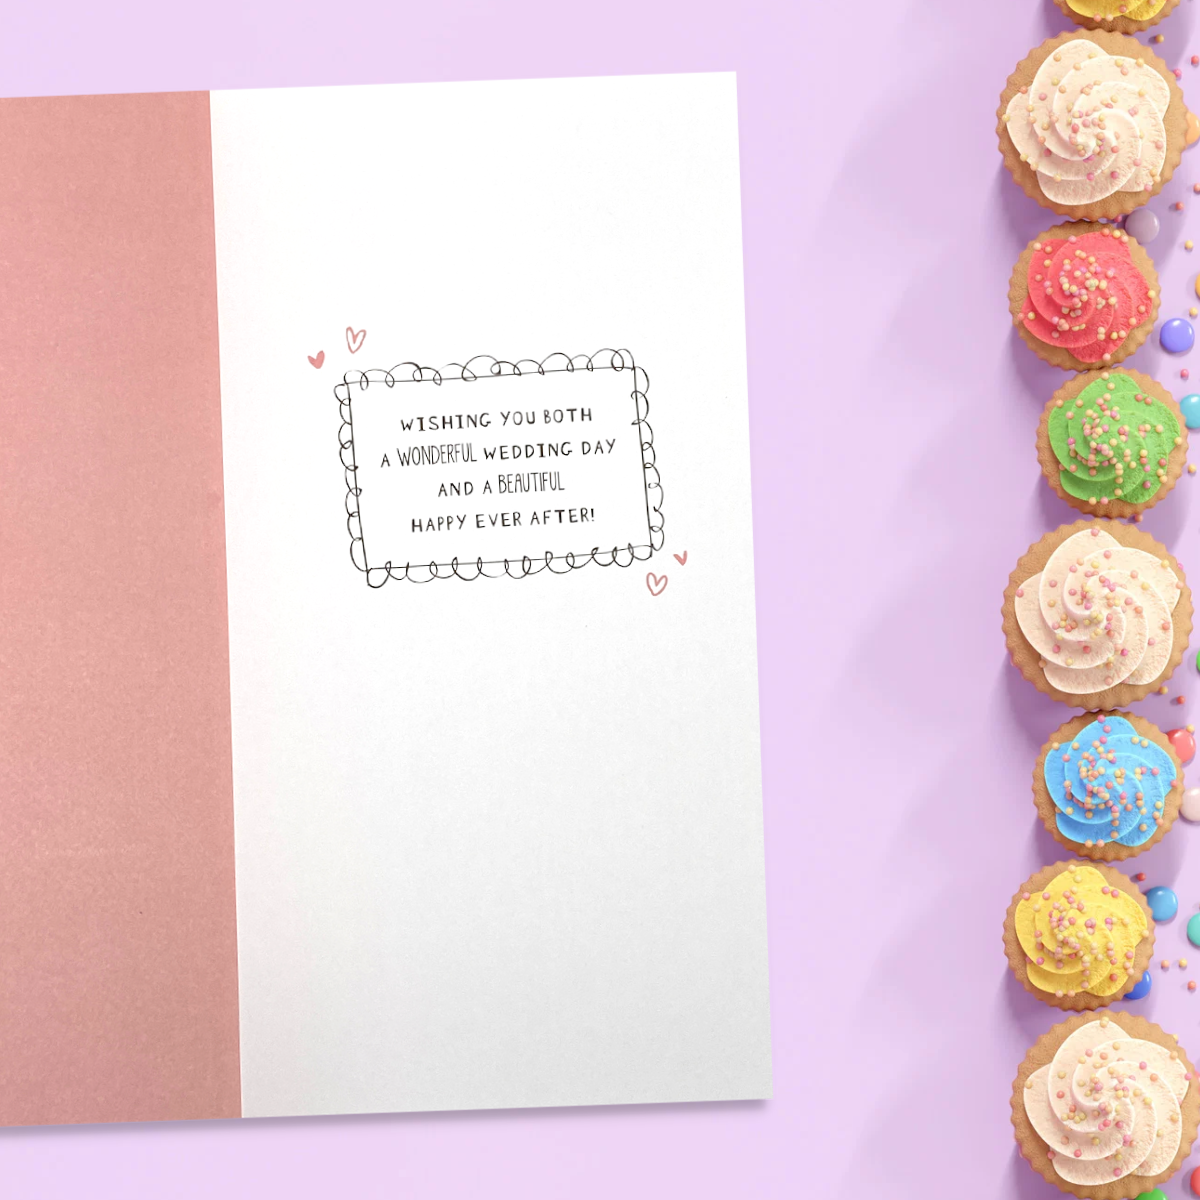 Inside image with pink card and coloured verse and graphics